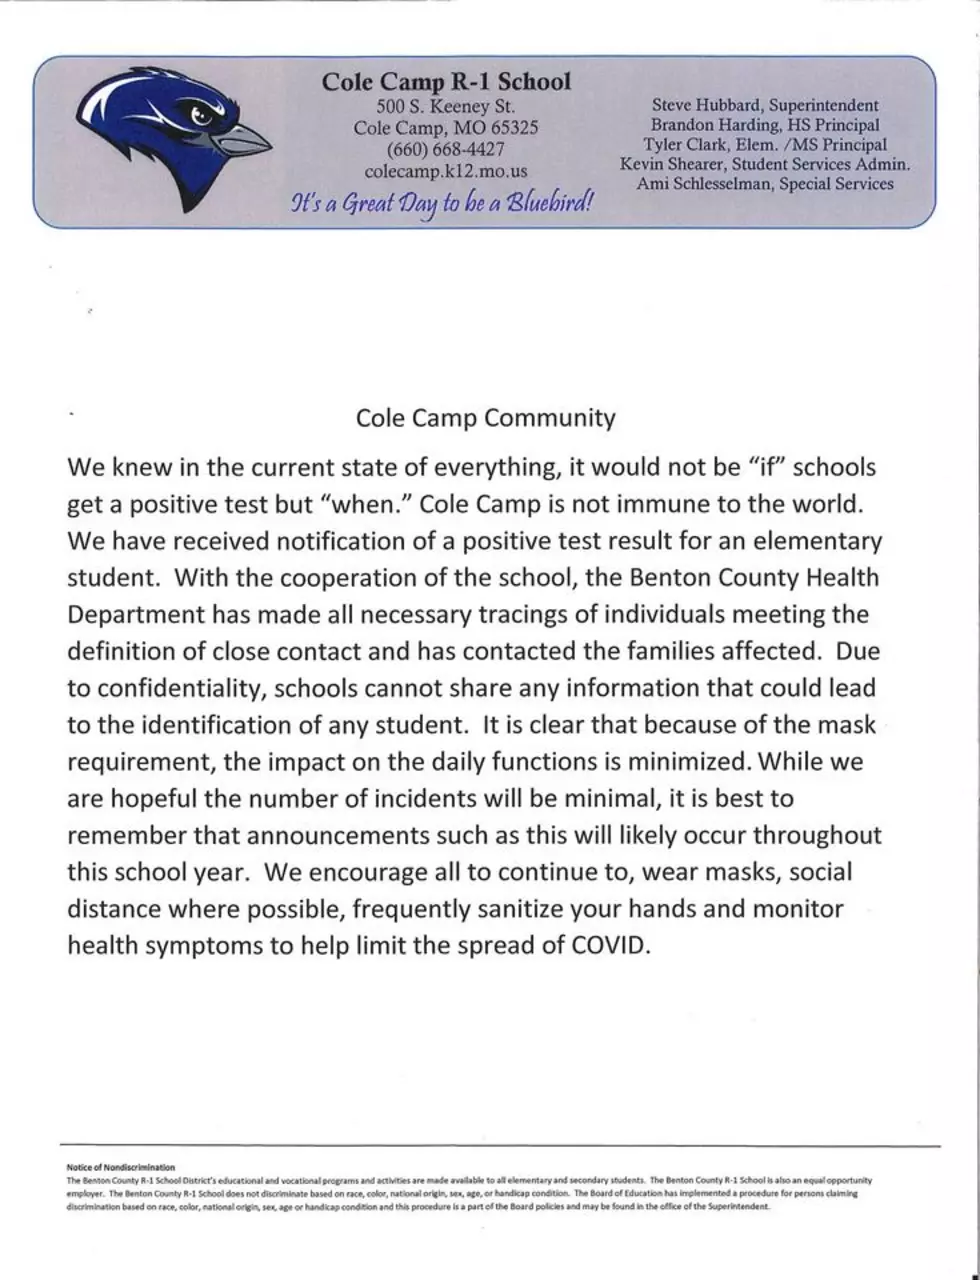 Cole Camp R-1 Elementary Student Tests Positive for COVID-19